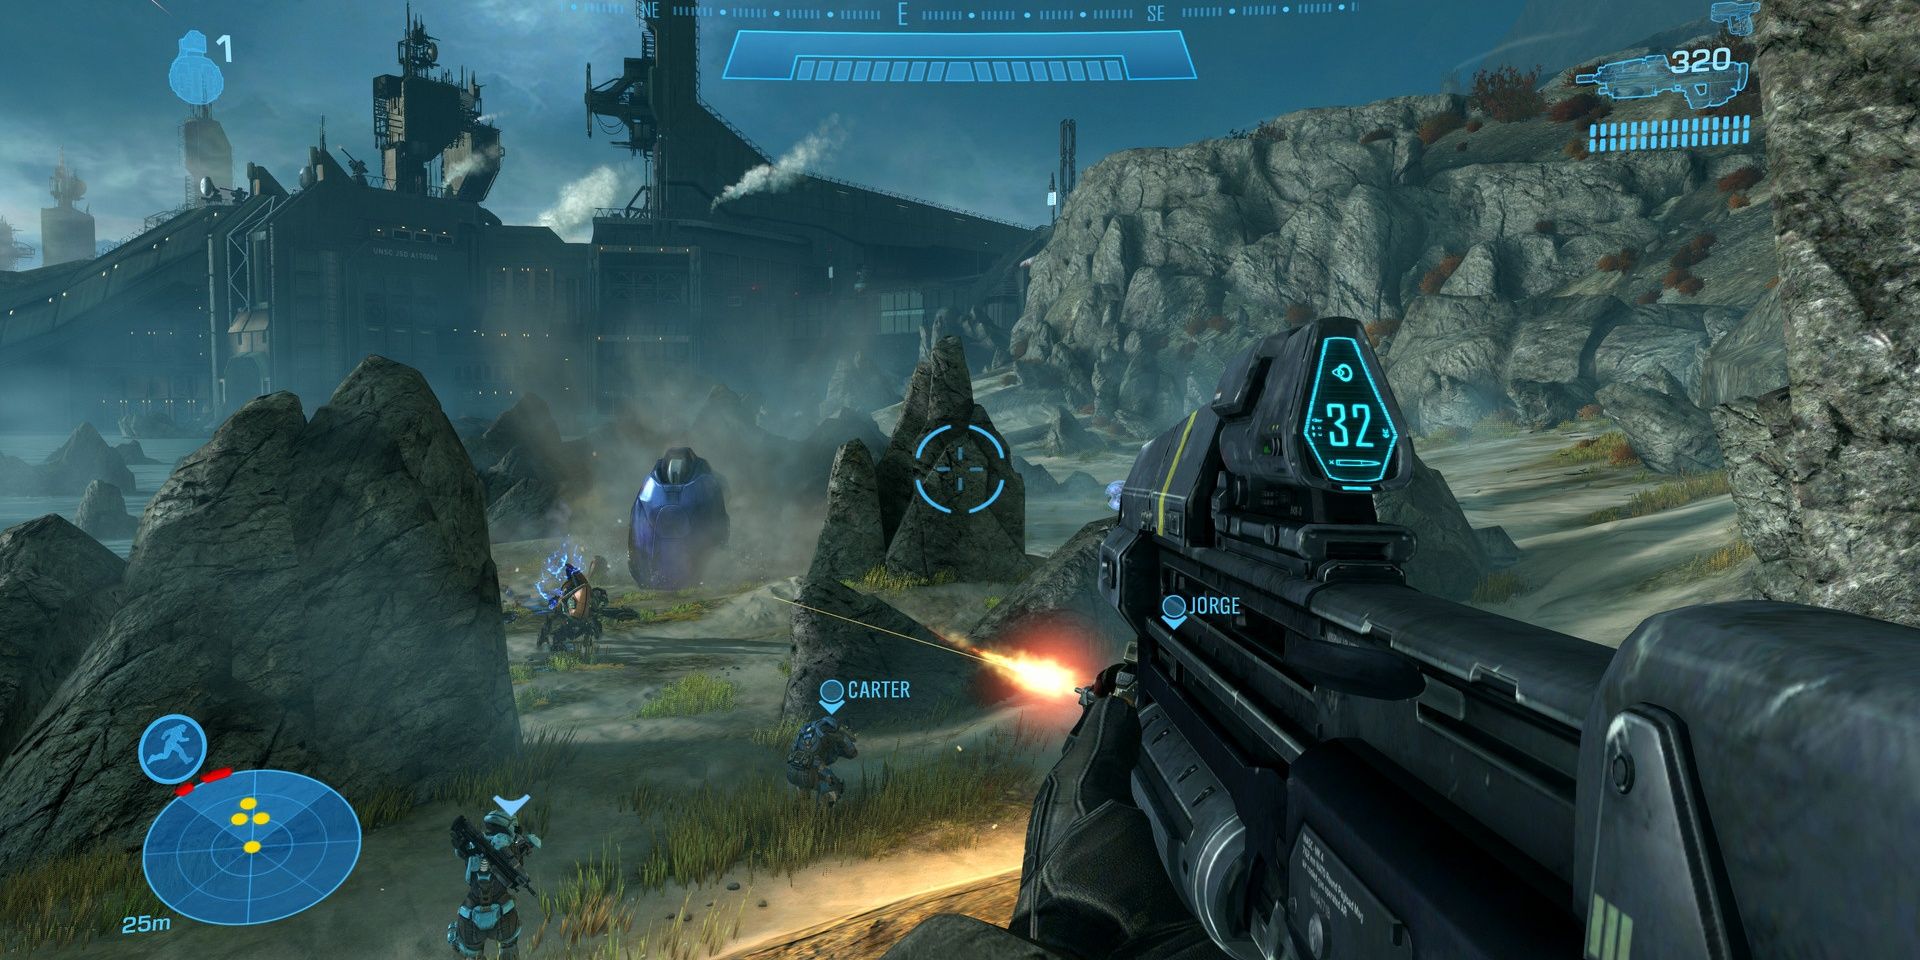 First person perspective shooting a gun at enemies in Halo: The Master Chief Collection